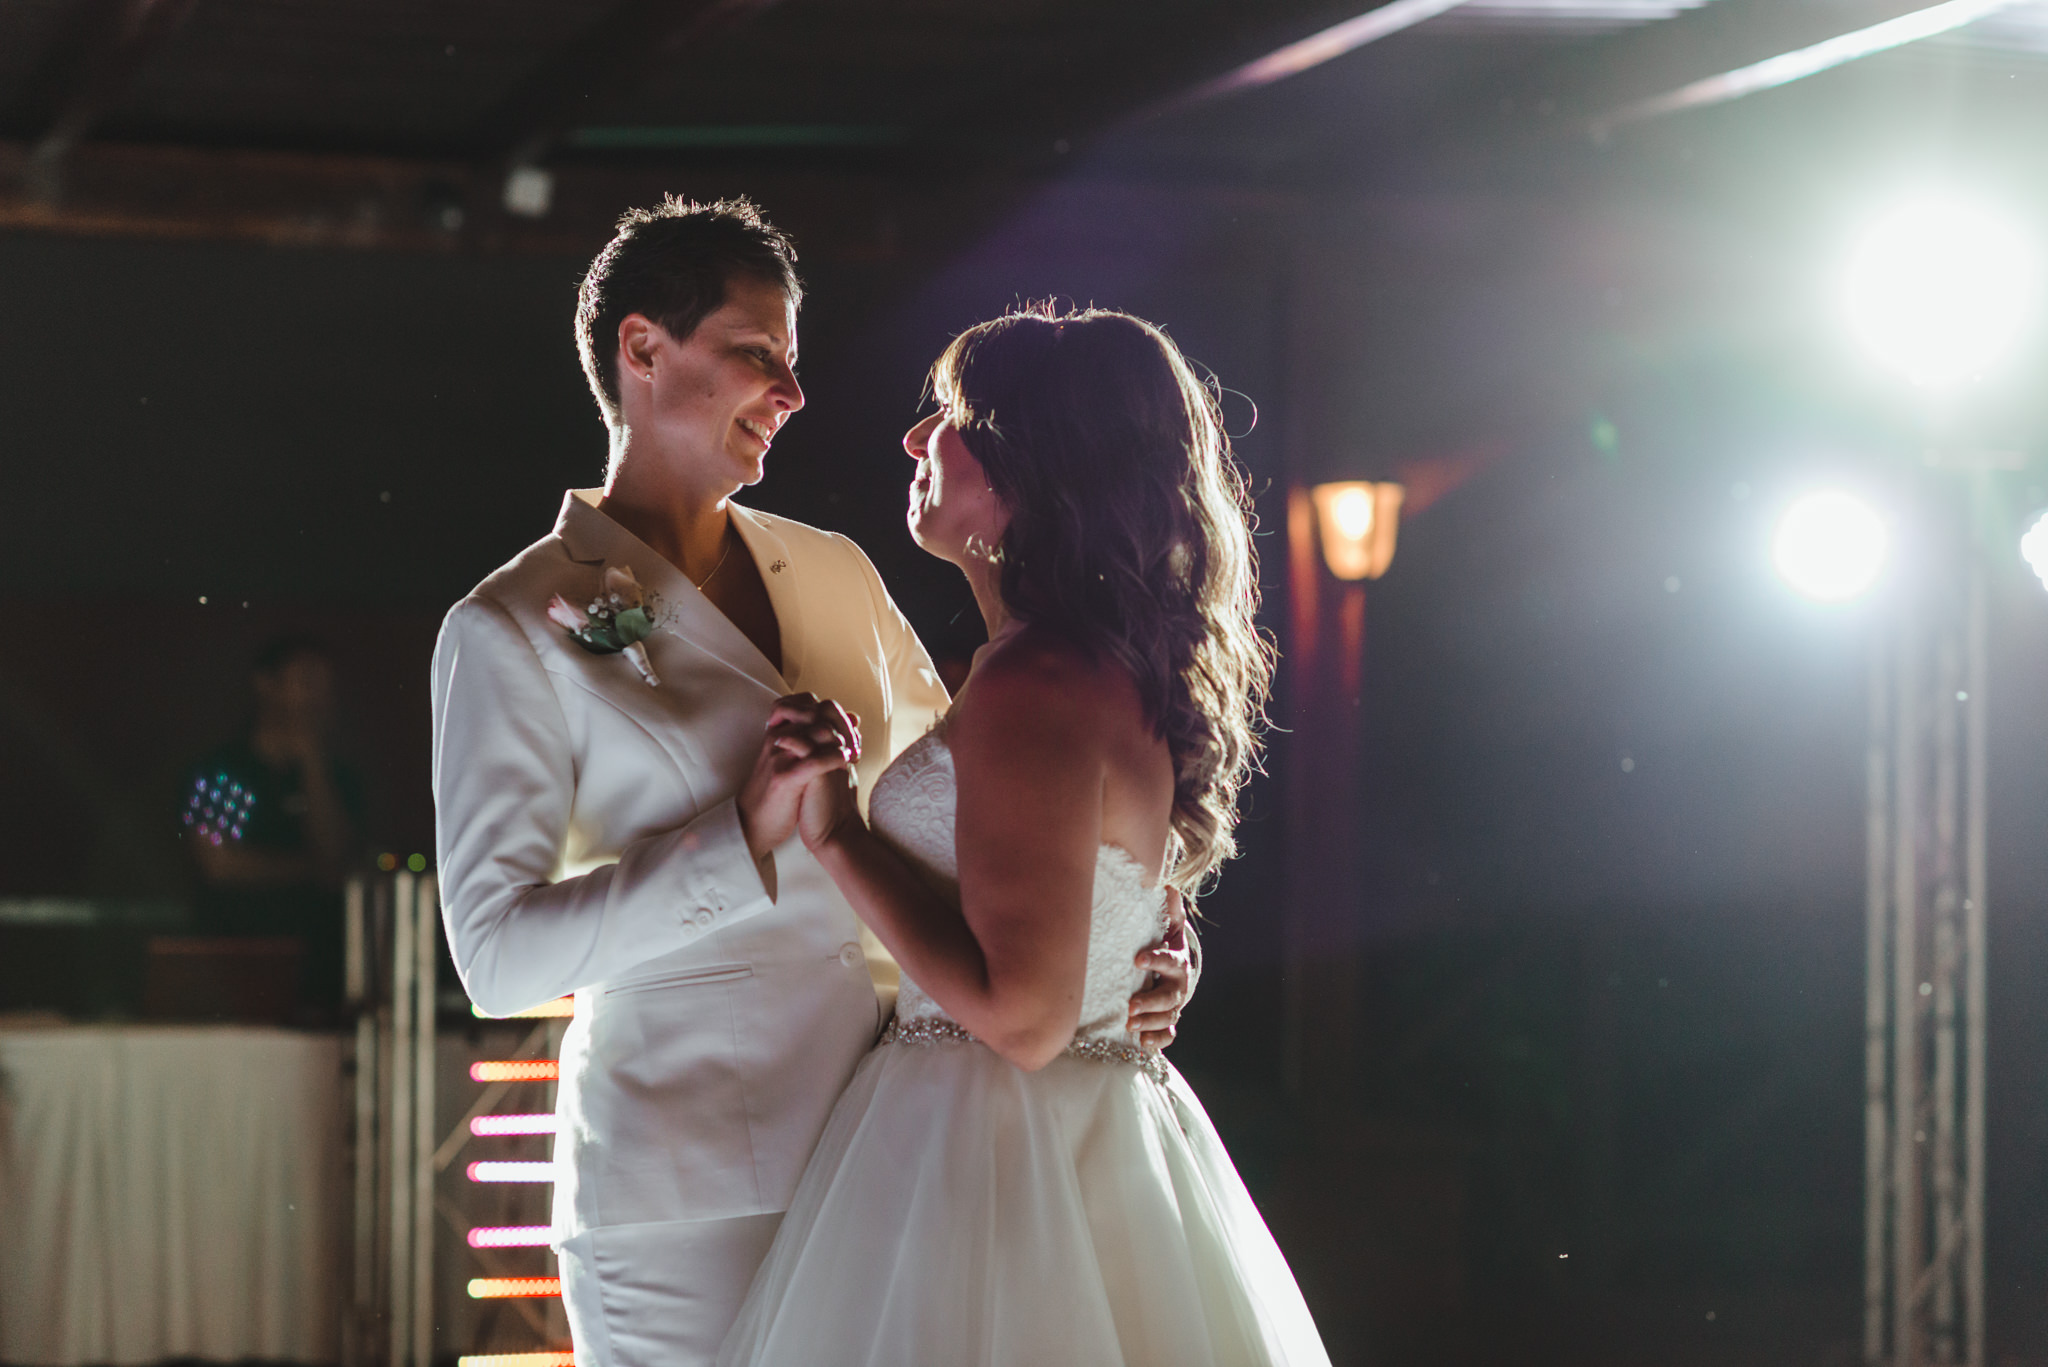 brides share their first dance during wedding reception at Now Sapphire Resort in Mexico